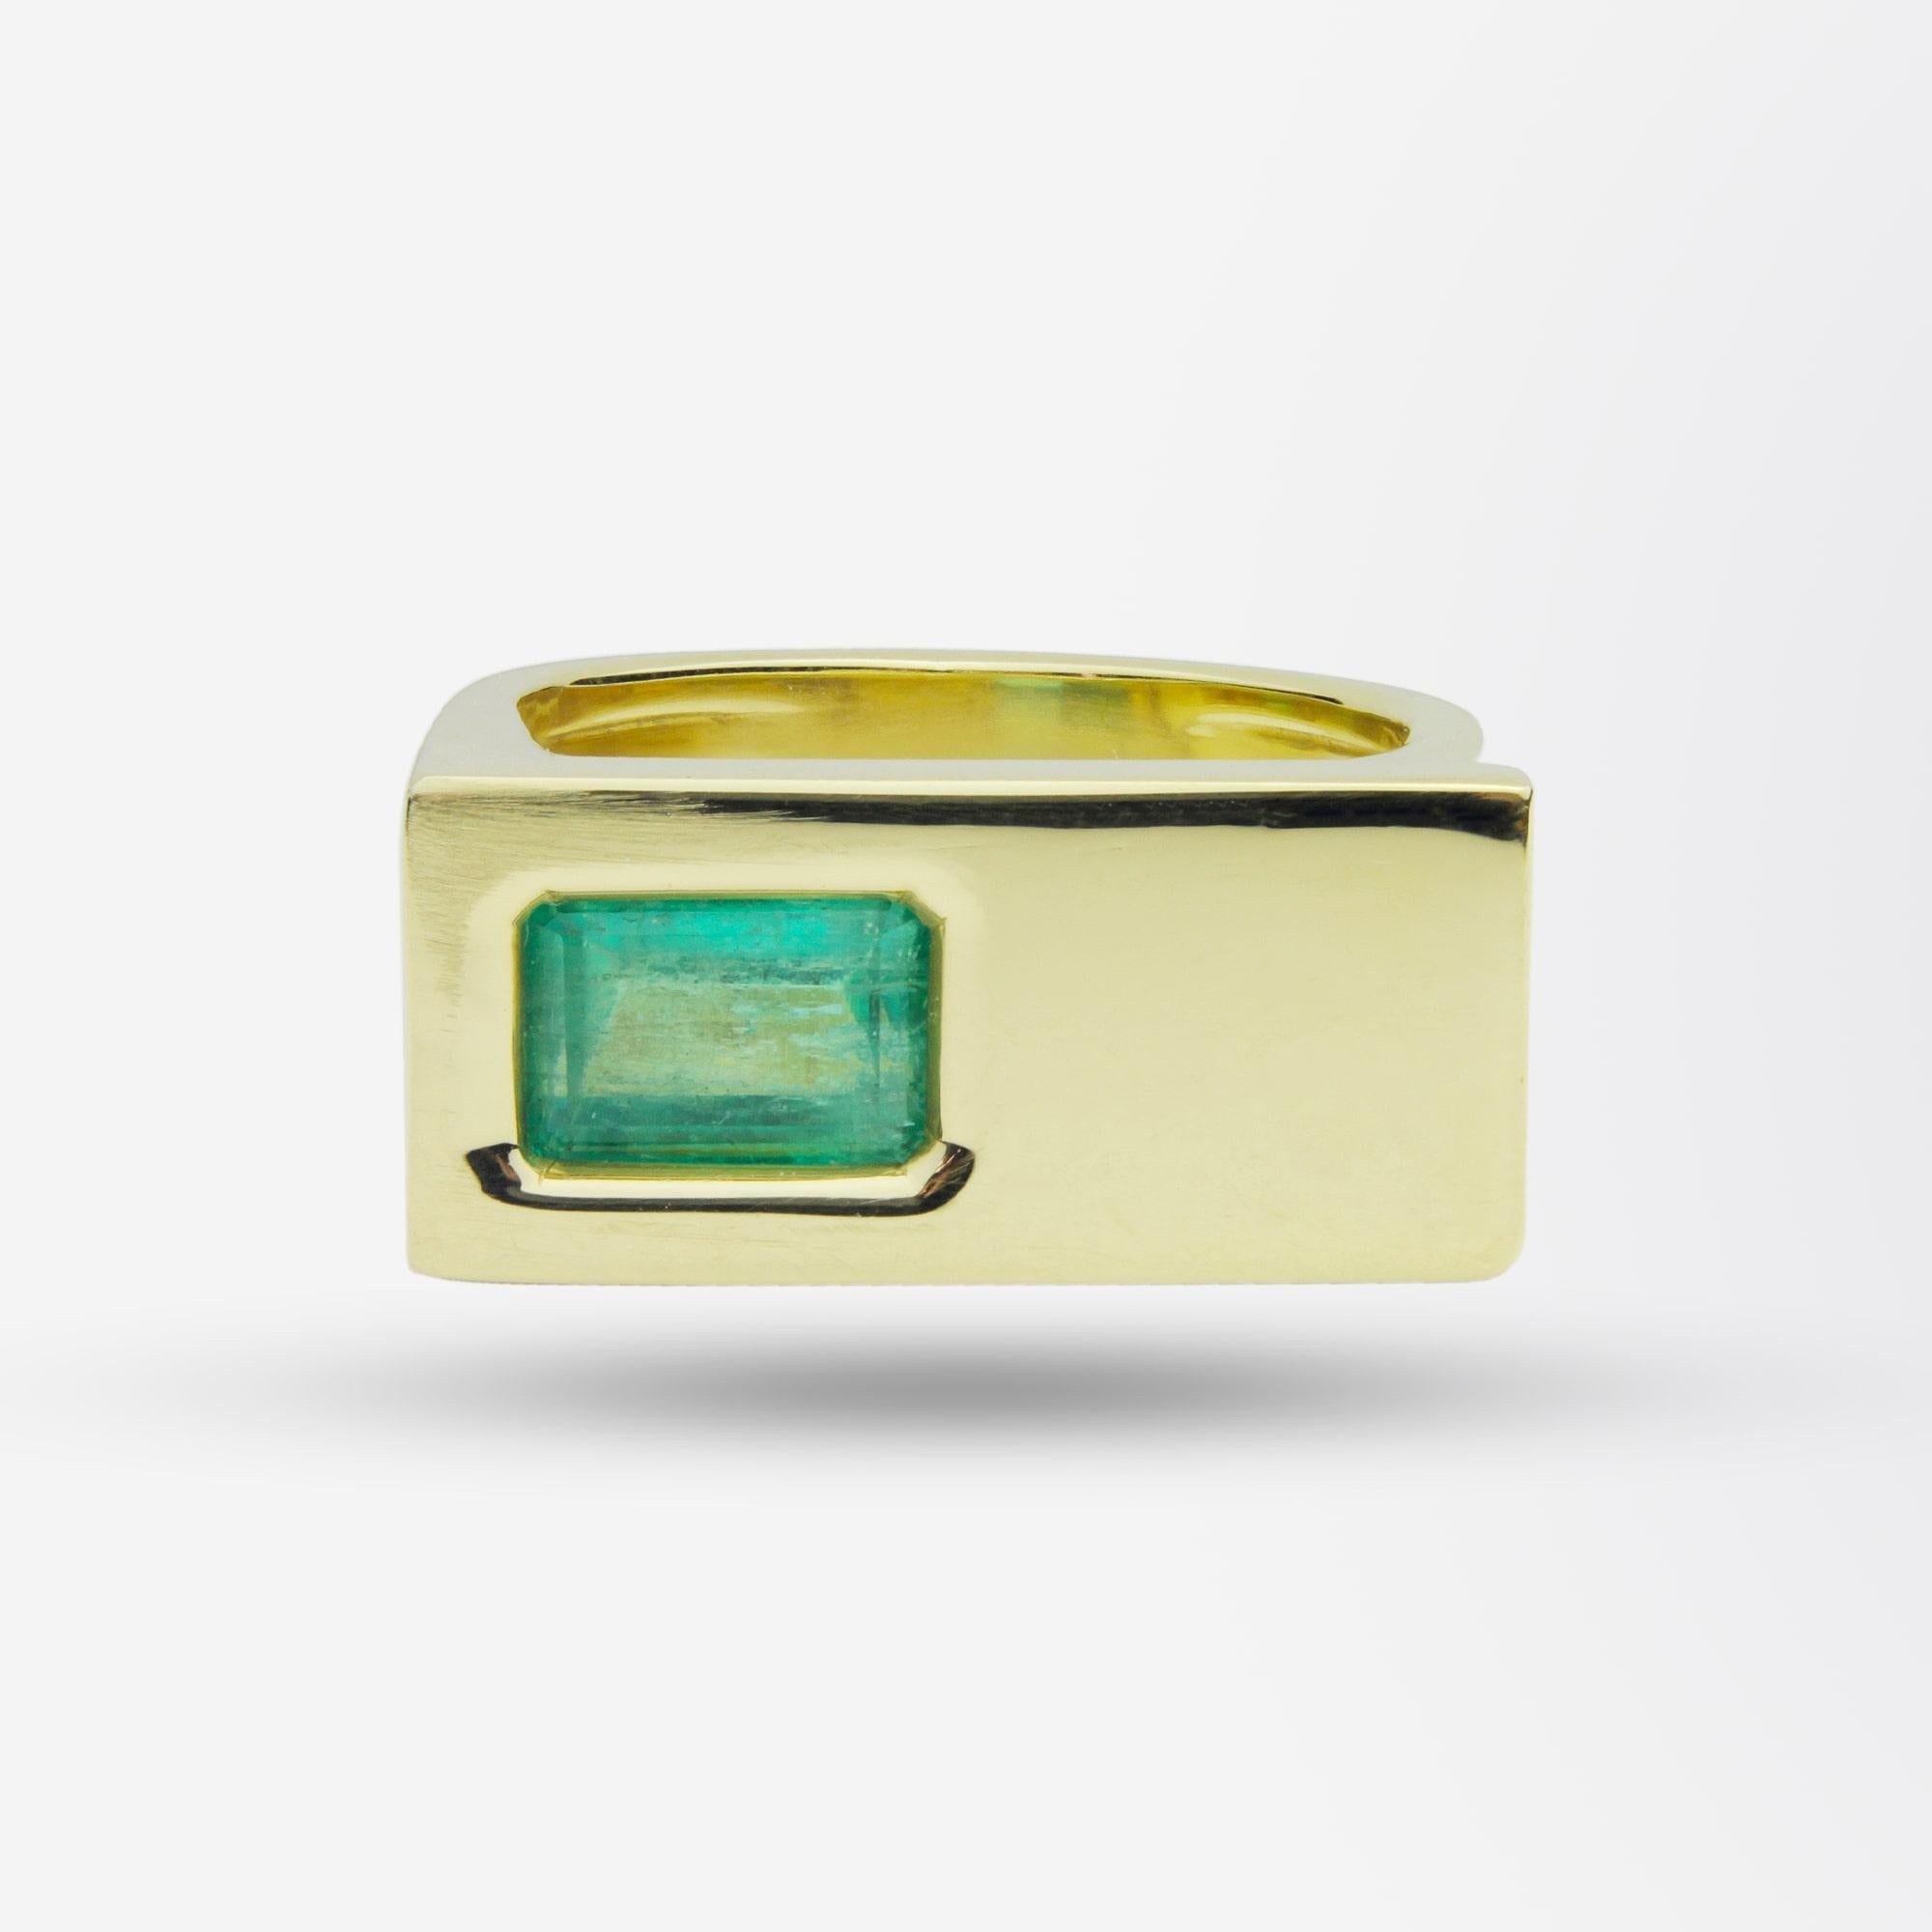 A heavy 18kt yellow gold ring set with a substantial octagonal cut, 2.02ct emerald. The ring is modernist in design and features sleek clean lines and crisp angles. The emerald is 'back set' which assists in avoiding direct knocks and abrasions to